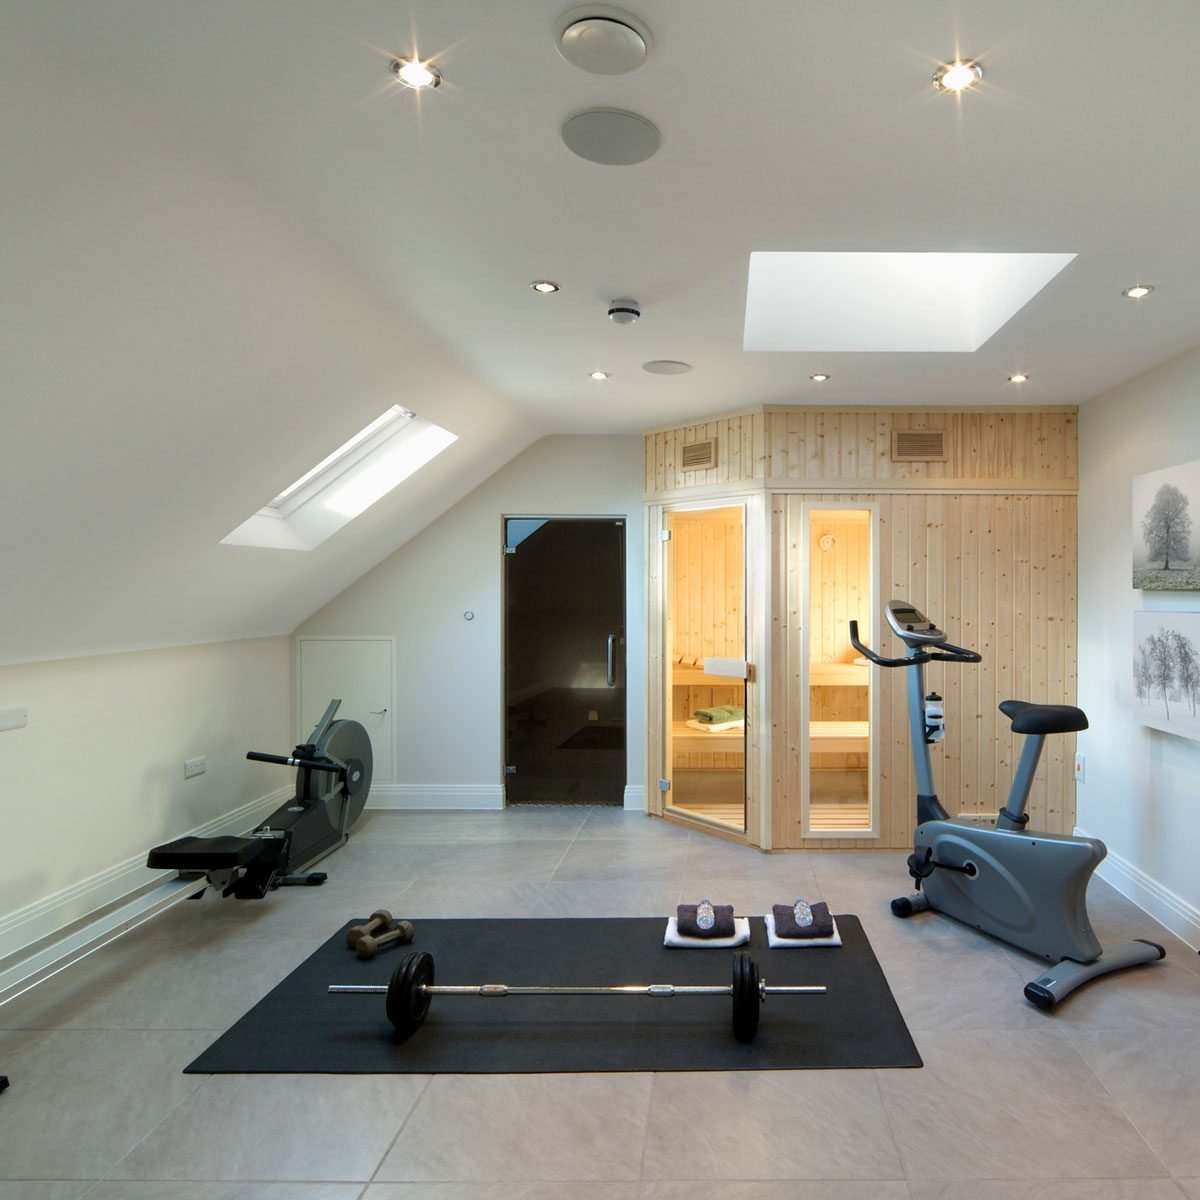 The 5 Best Home Gym Flooring Ideas, How To Put Gym Floor Over Carpet